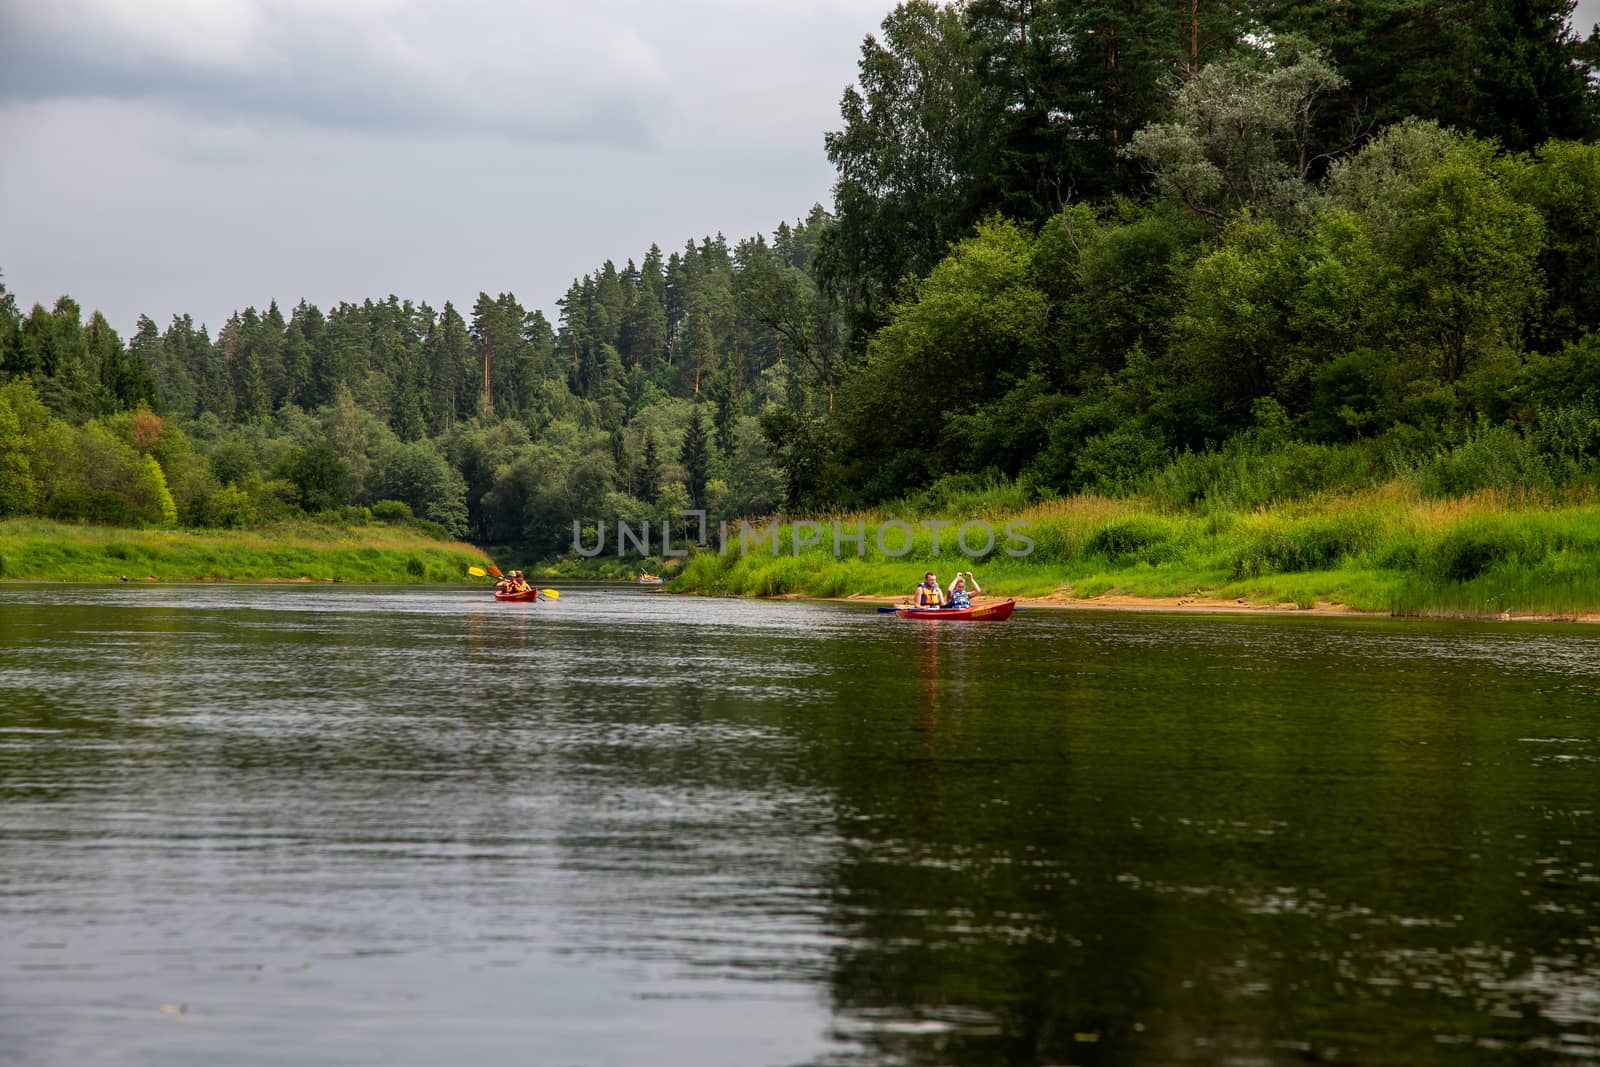 People boating on river Gauja in Latvia, peacefull nature scene. By boat through the river. Boat trip along the Gauja River in Latvia. The Gauja is the longest river in Latvia, which is located only in the territory of Latvia. Length - 452 km.

